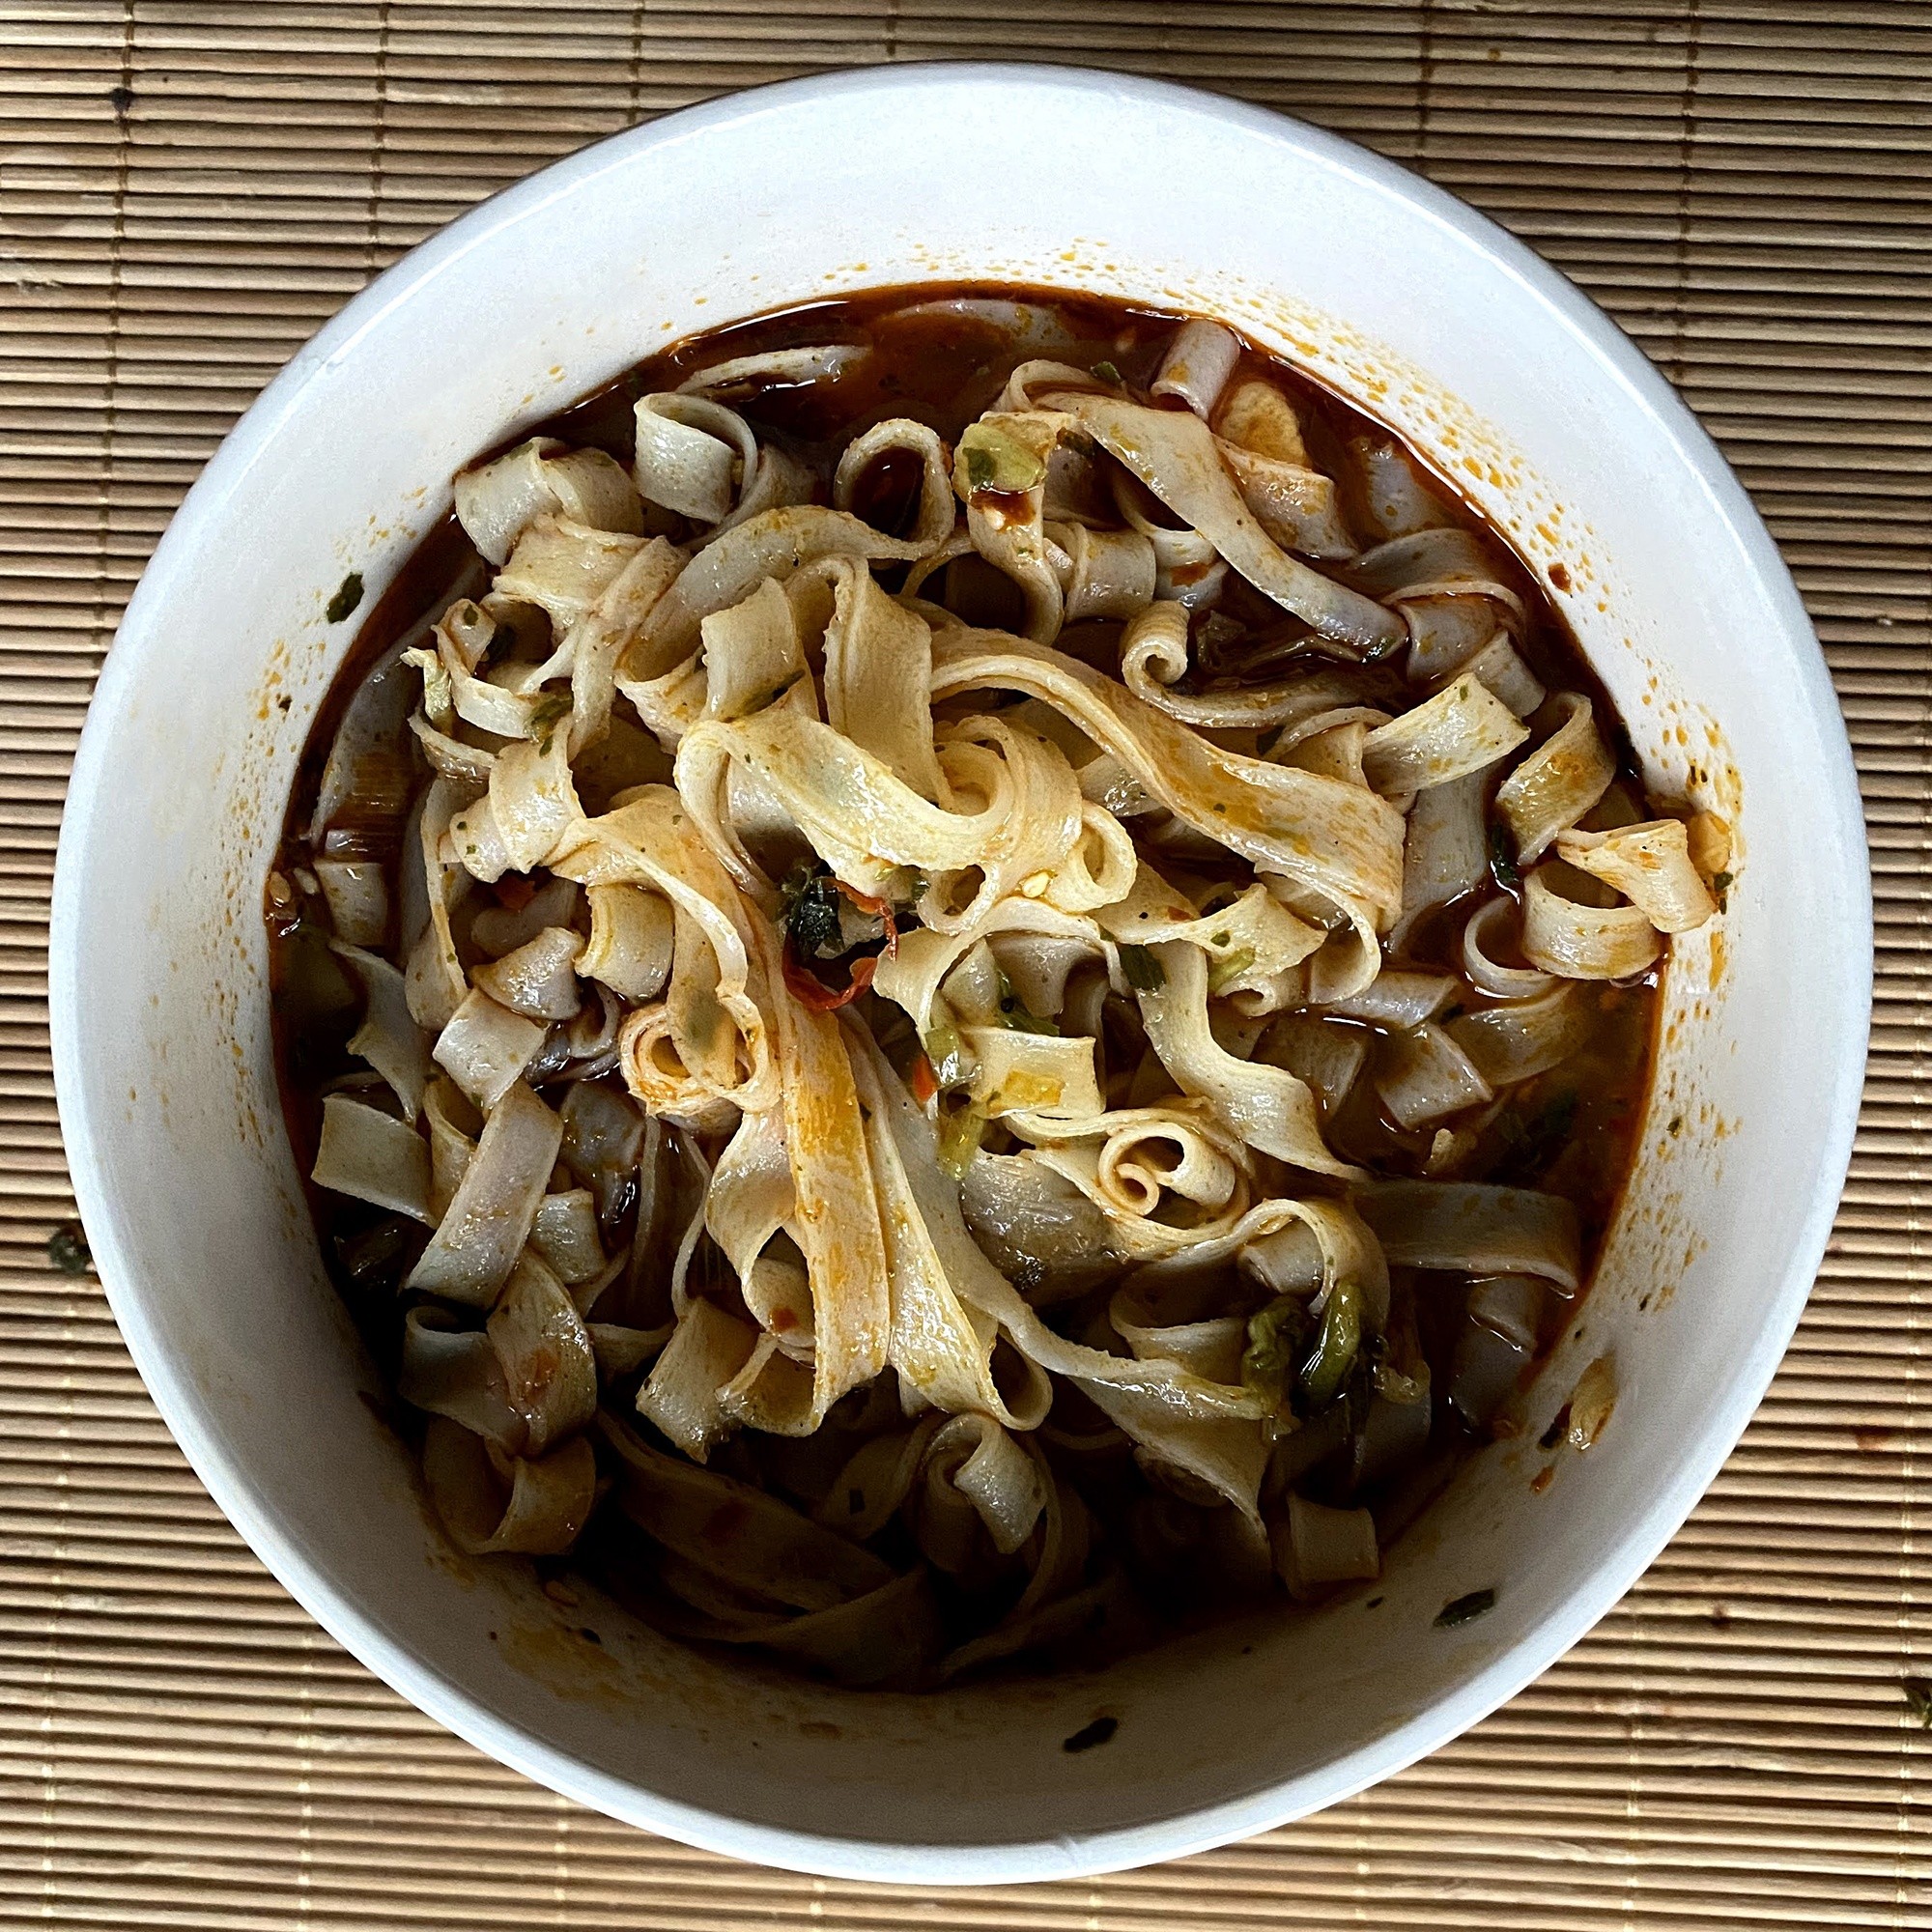 #1893: Chencun Non-Fried Instant Noodles "Beef"